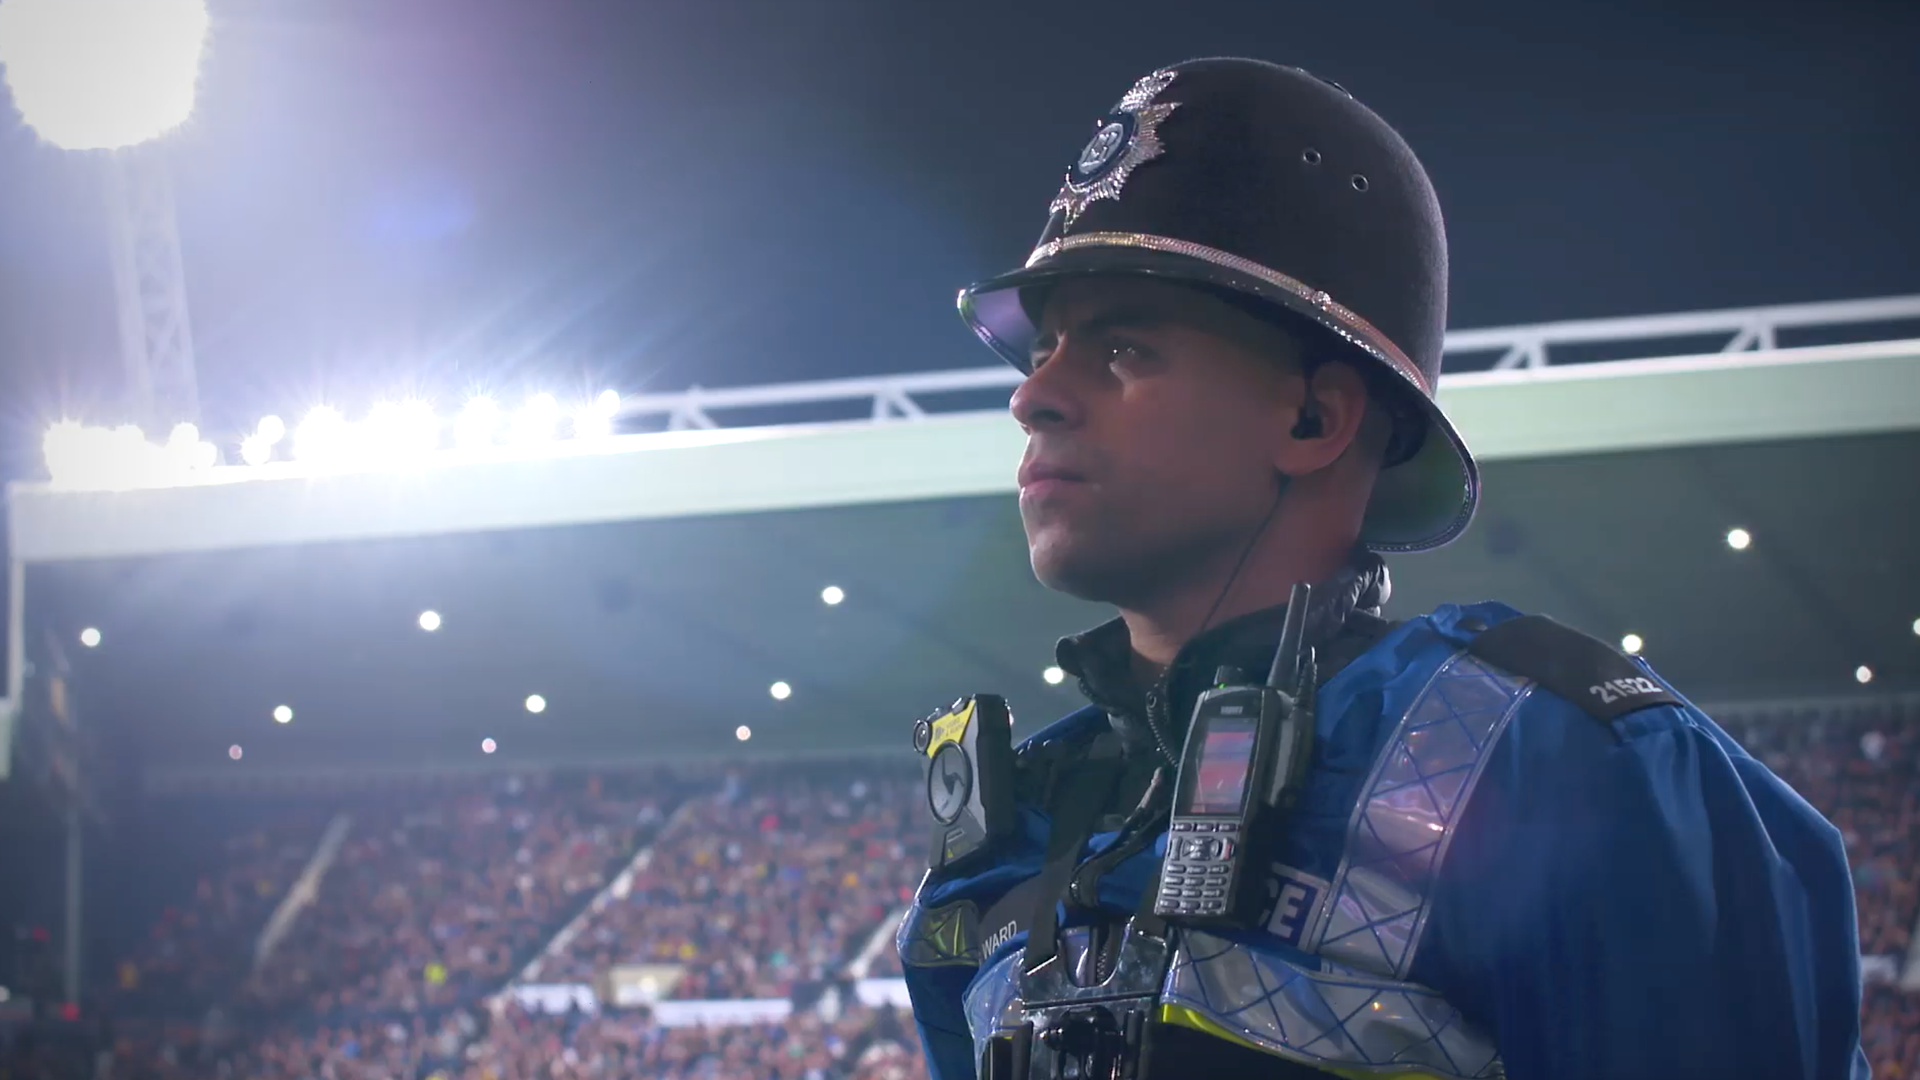 More police forces consider football hate crime officers